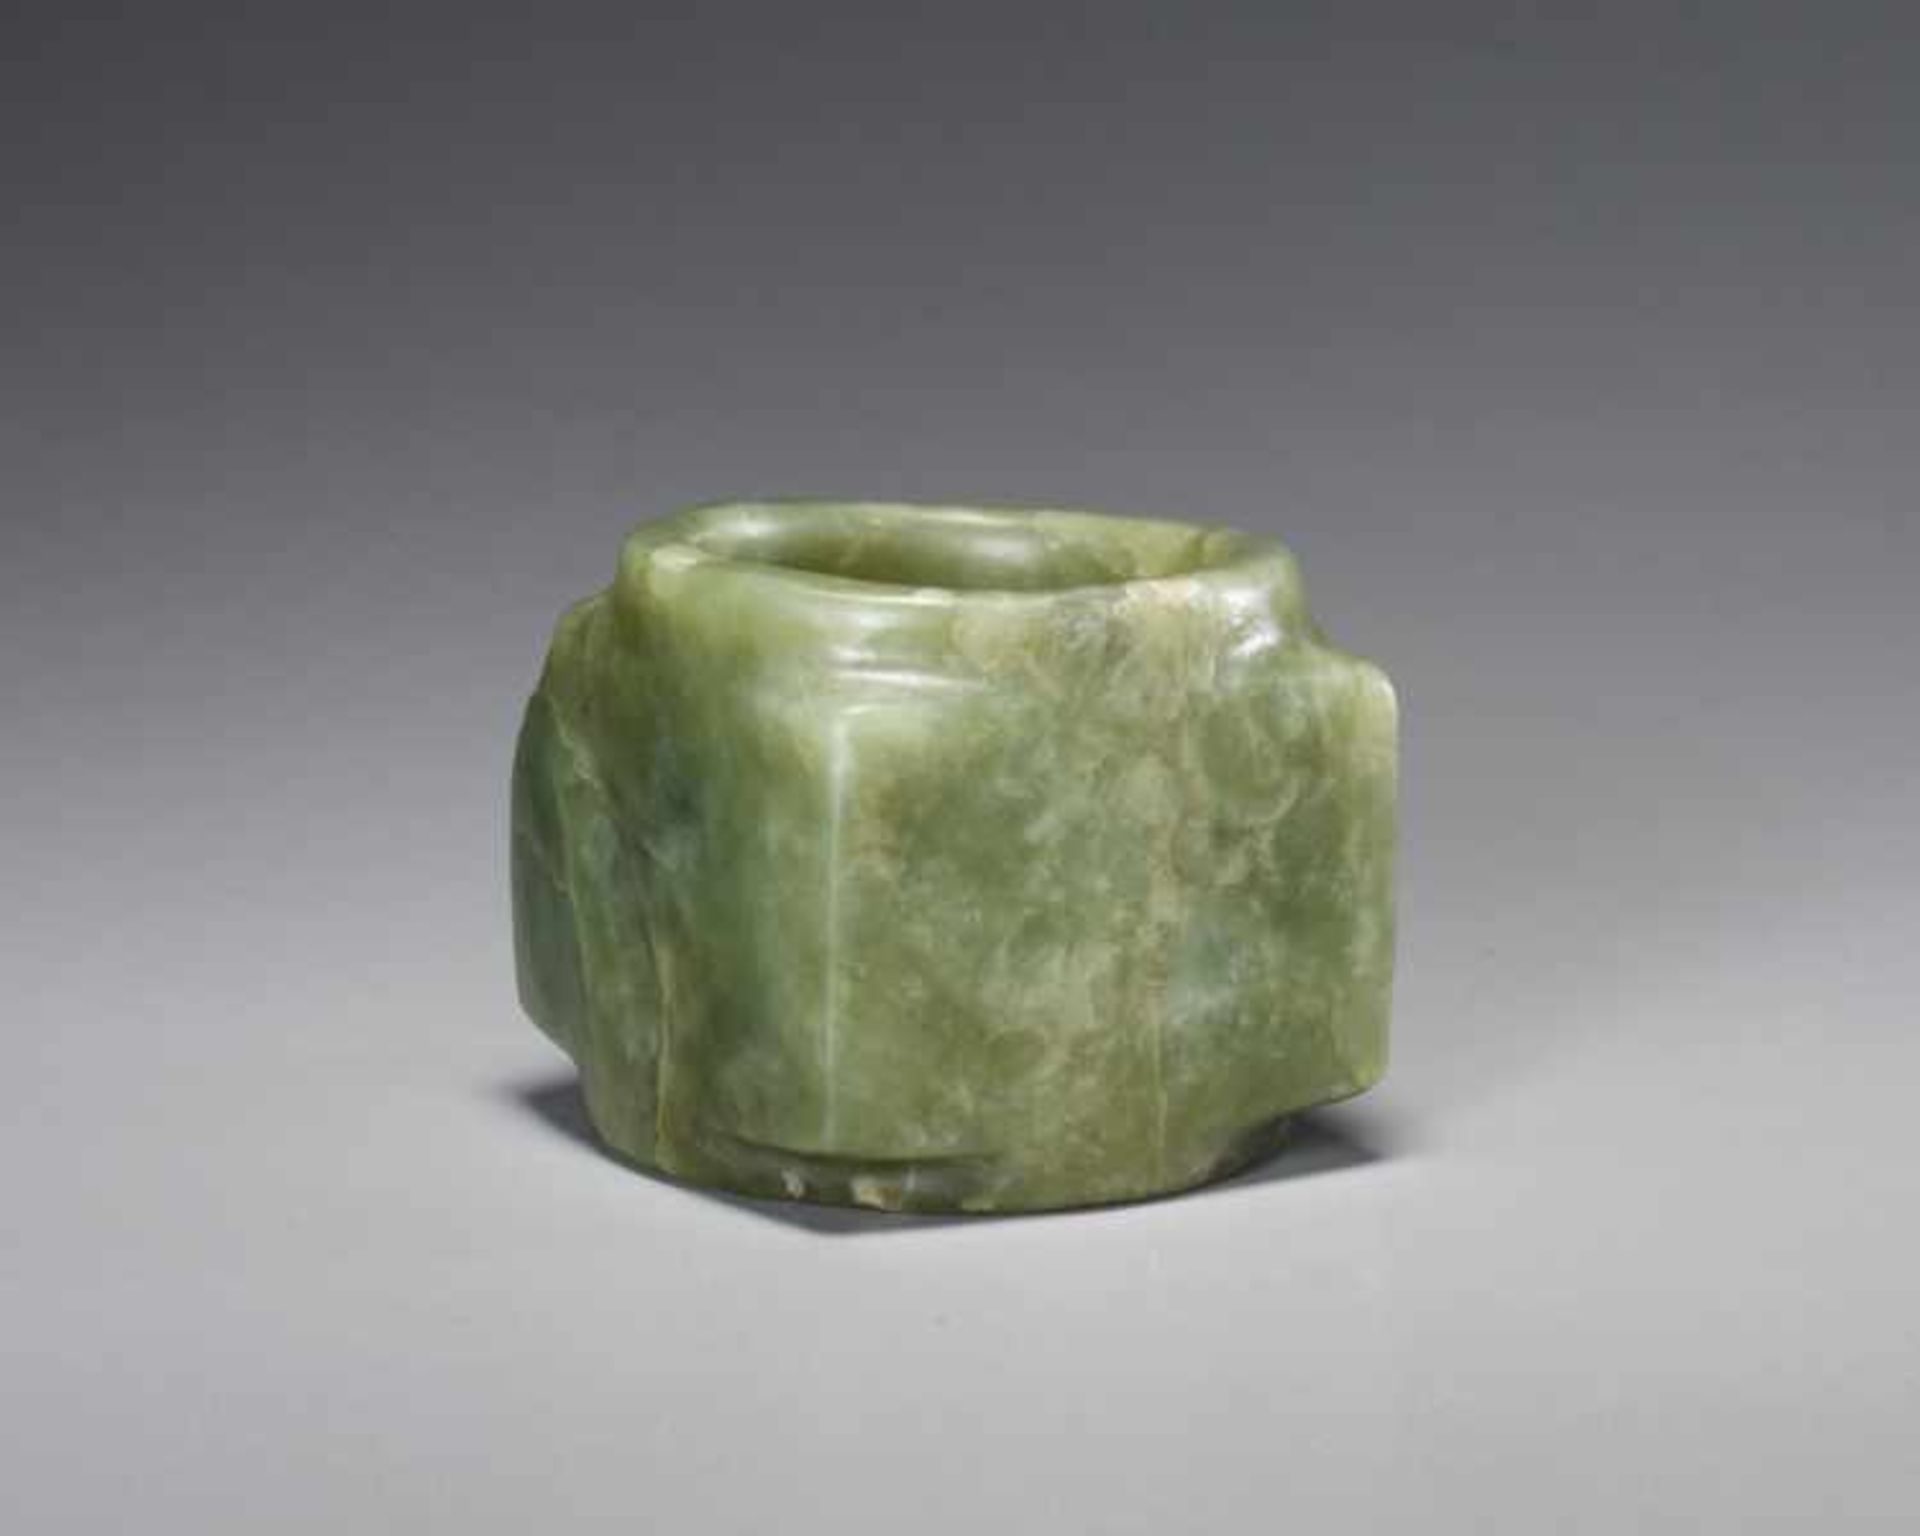 A BEAUTIFUL, THOROUGHLY POLISHED PLAIN CONG OF SQUARE SHAPE CARVED FROM EMERALD GREEN JADE Jade. - Image 4 of 6